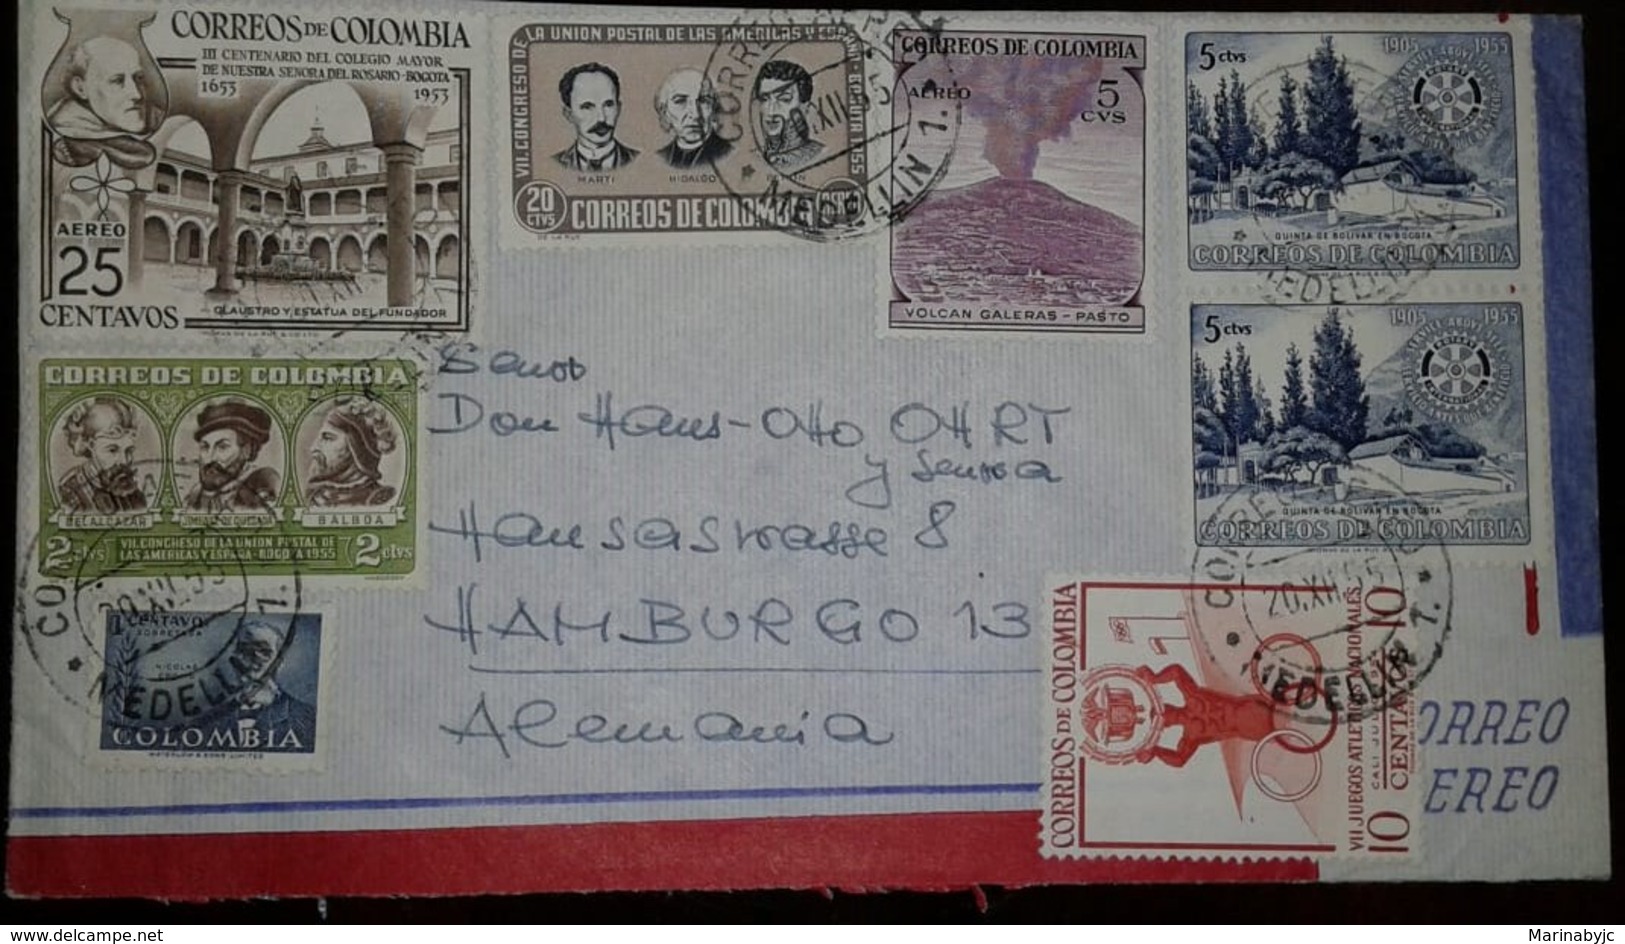 L) 1955 COLOMBIA, VOLCANO GALERAS, 5C, 7th CONGRESS OF THE POSTAL UNION OF THE AMERICAS AND SPAIN, MARTI, HIDALGO, PETIO - Colombia